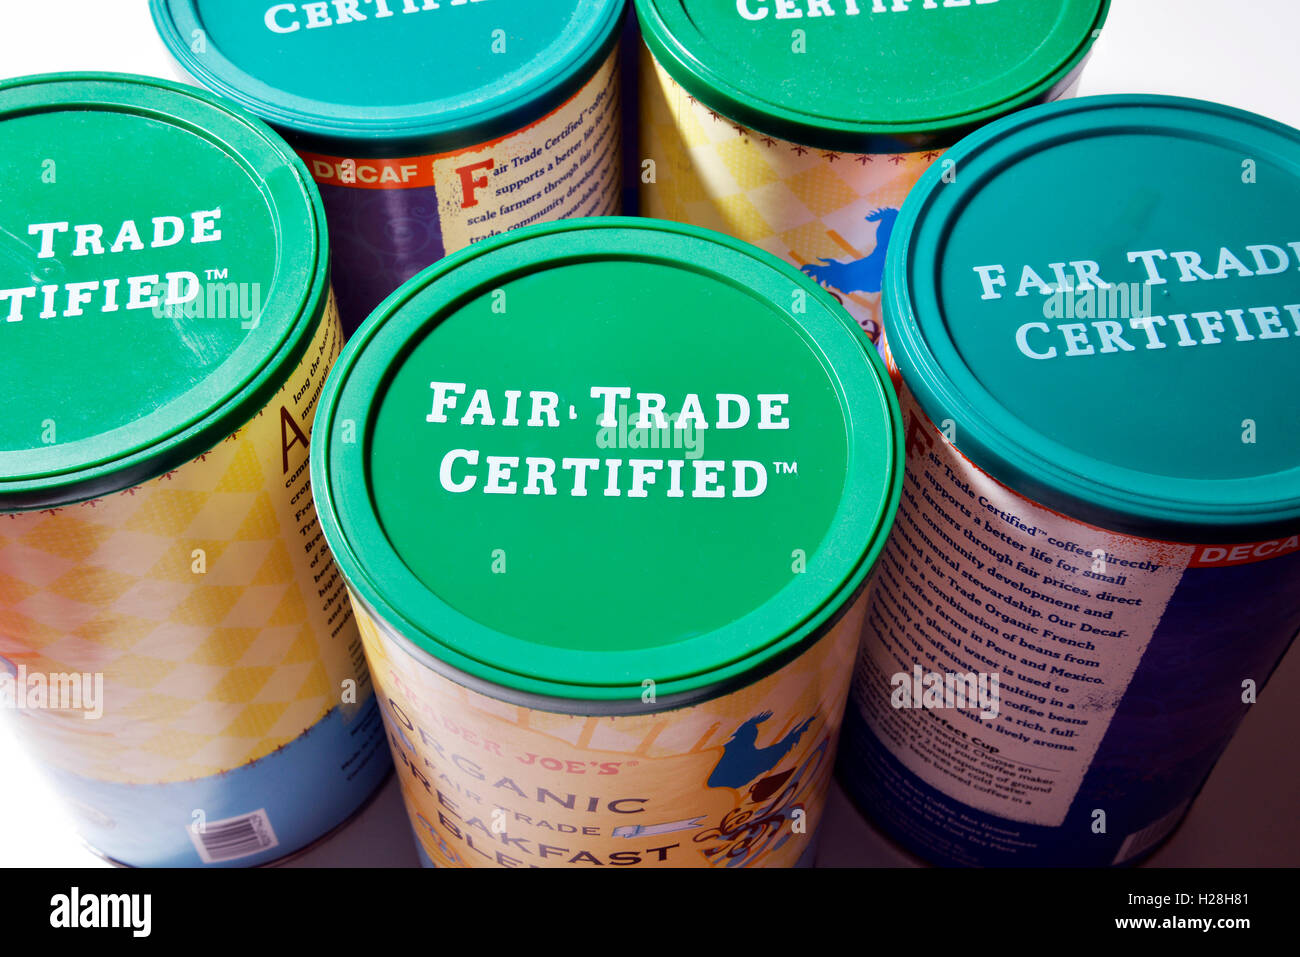 Containers of Fair Trade Certified coffee purchased at Trader Joe's, Tucson, Arizona, USA. Stock Photo